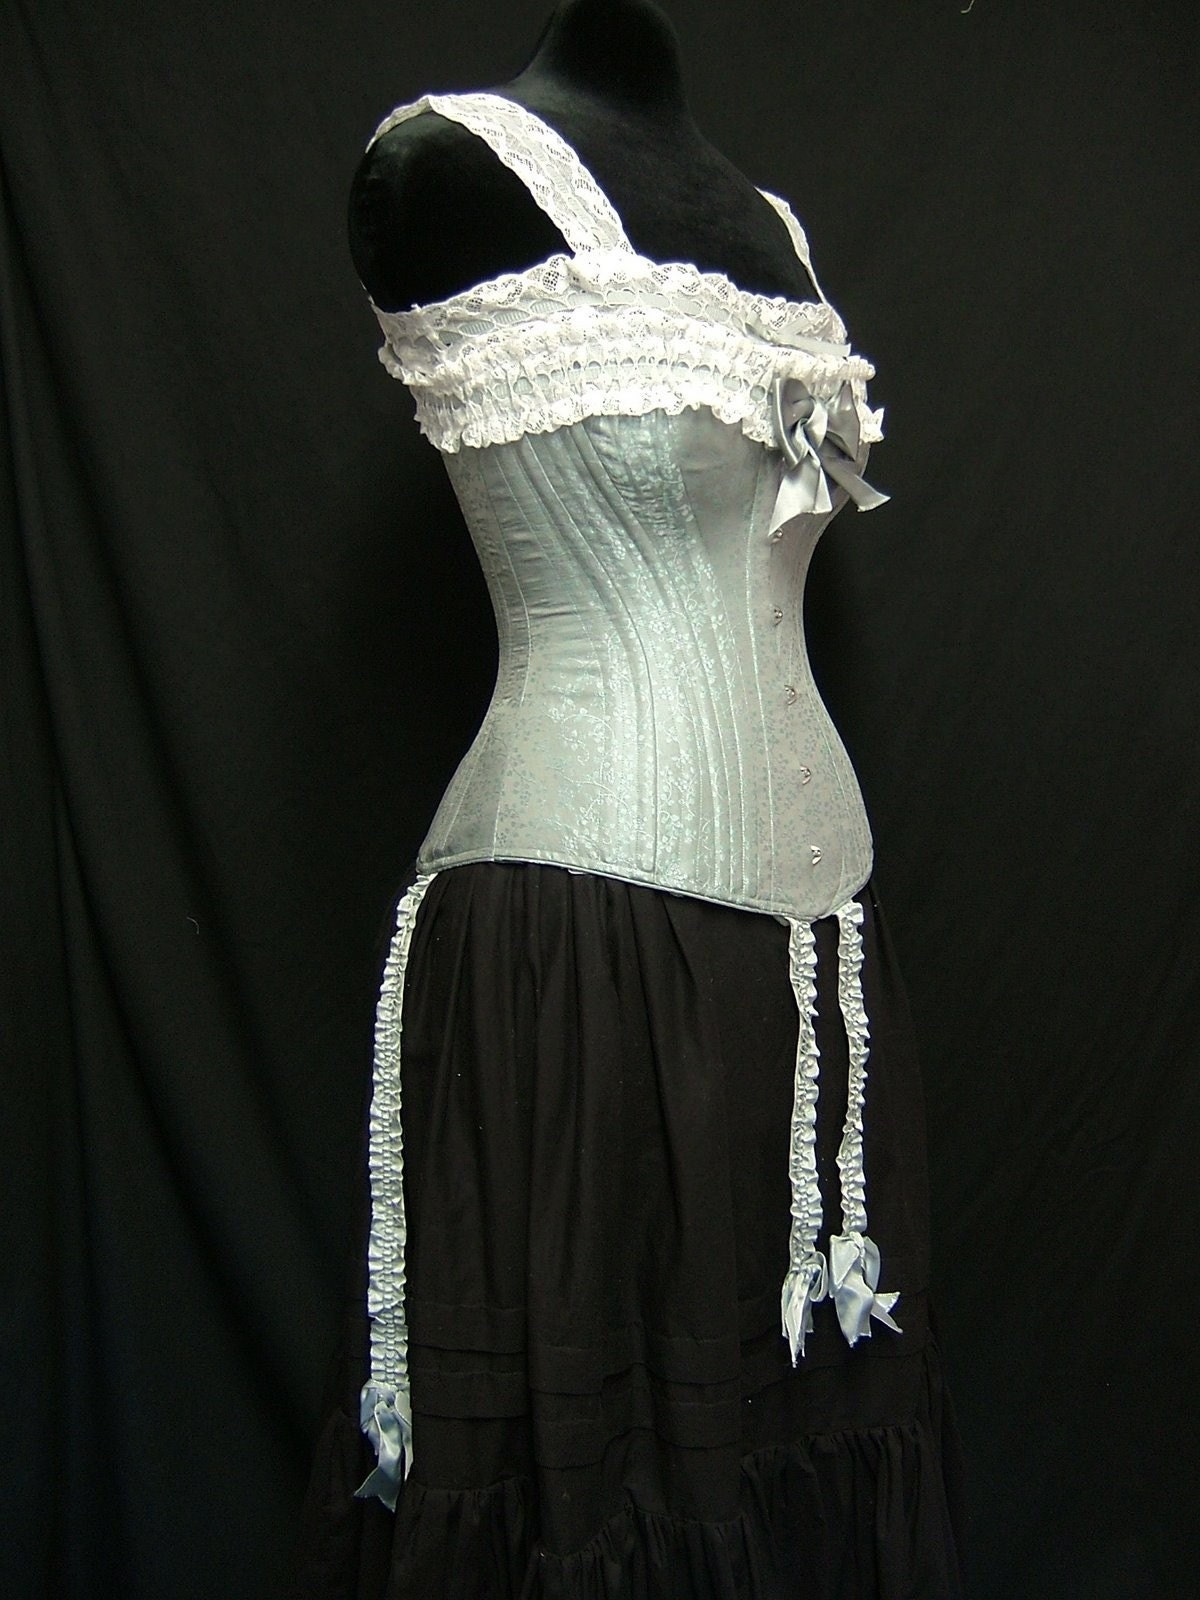 Design Your Own Bespoke Victorian Era Corset, 19th Century Reenactment  Corset With Trim, Garters and Your Choice of Fabrics Custom Materials -   Canada